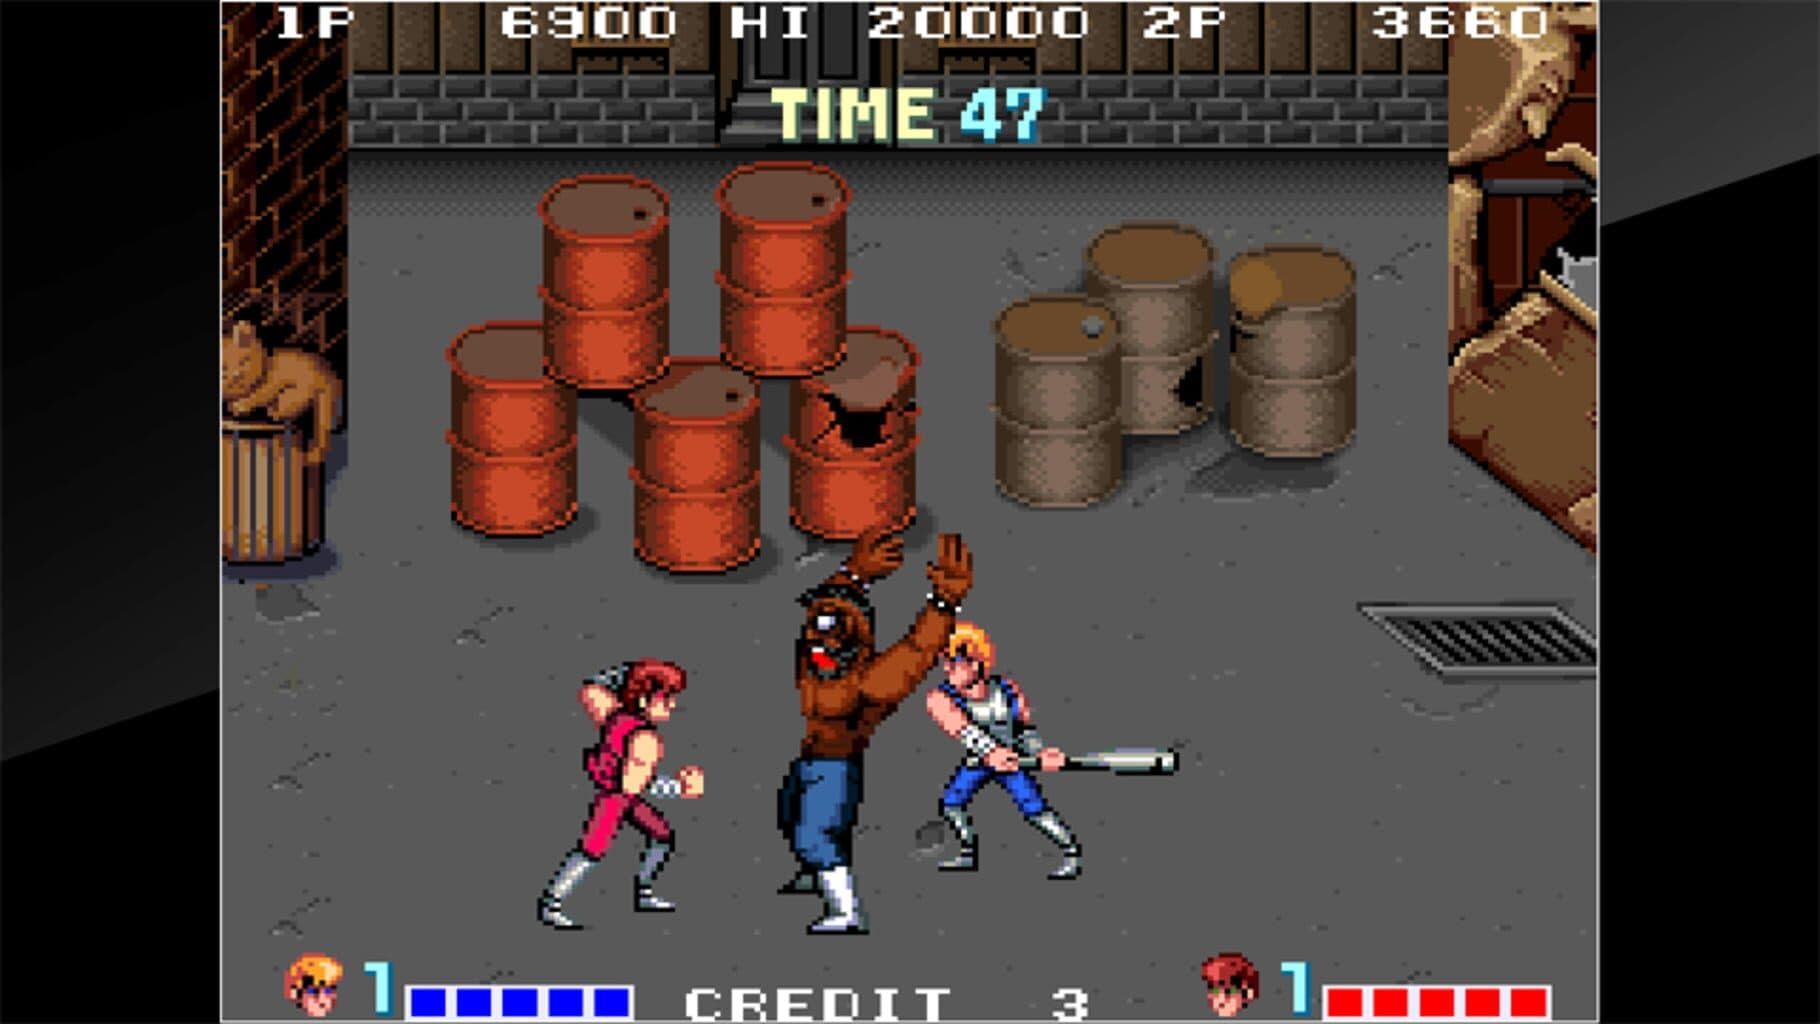 Arcade Archives: Double Dragon Image